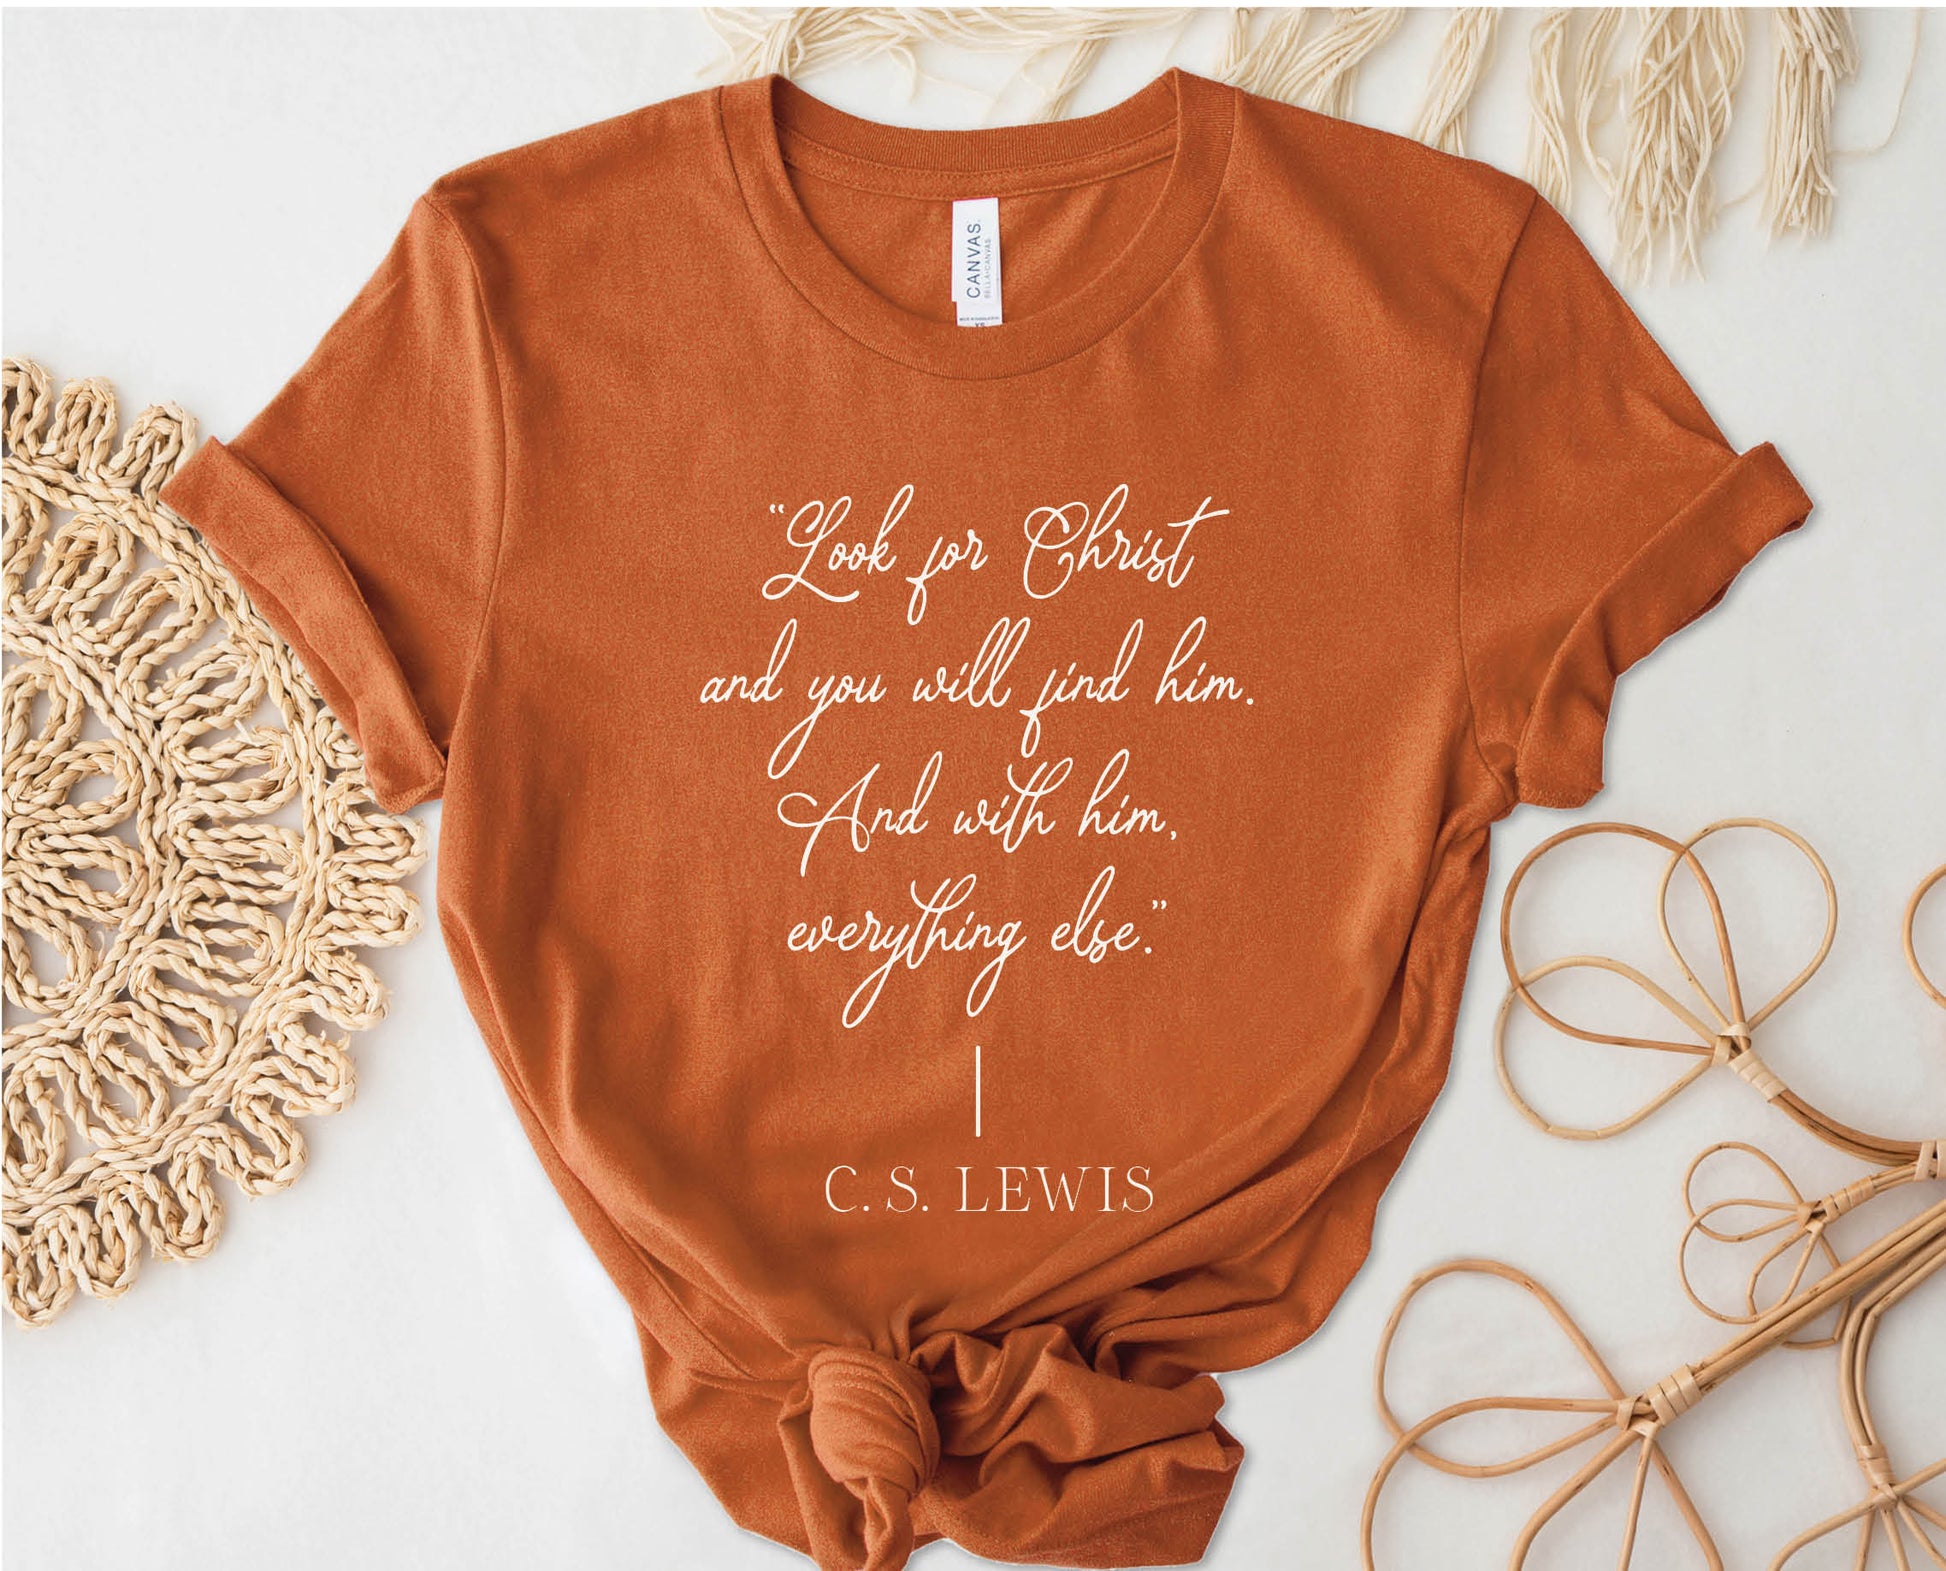 Soft quality toasty Autumn rust orange t-shirt with British writer Narnia author C.S. Lewis quote "Look for Christ and you will find him. And with him, everything else."  printed in white vintage script - Christian aesthetic unisex tee shirt design for women